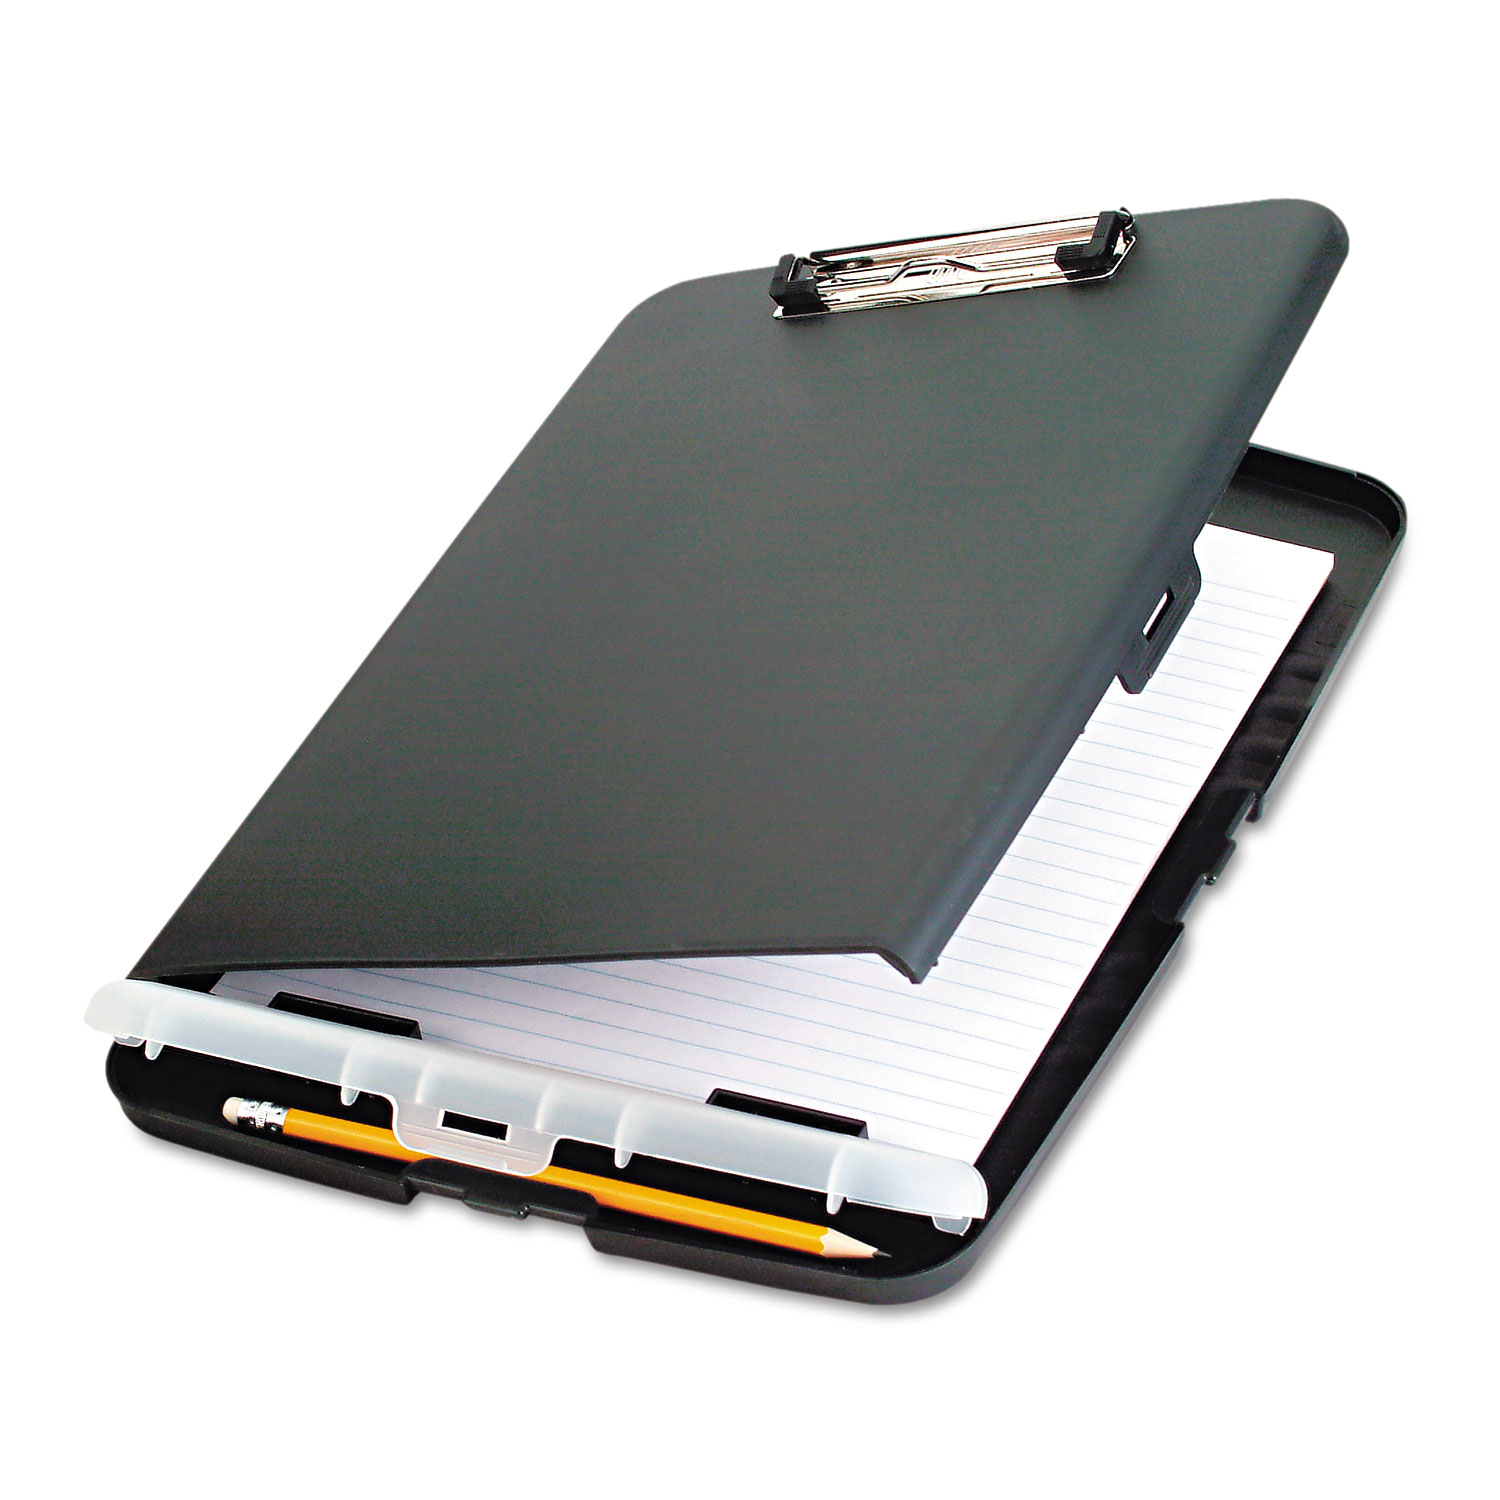  Officemate 83303 Low Profile Storage Clipboard, 1/2 Capacity, Holds 9w x 12h, Charcoal (OIC83303) 